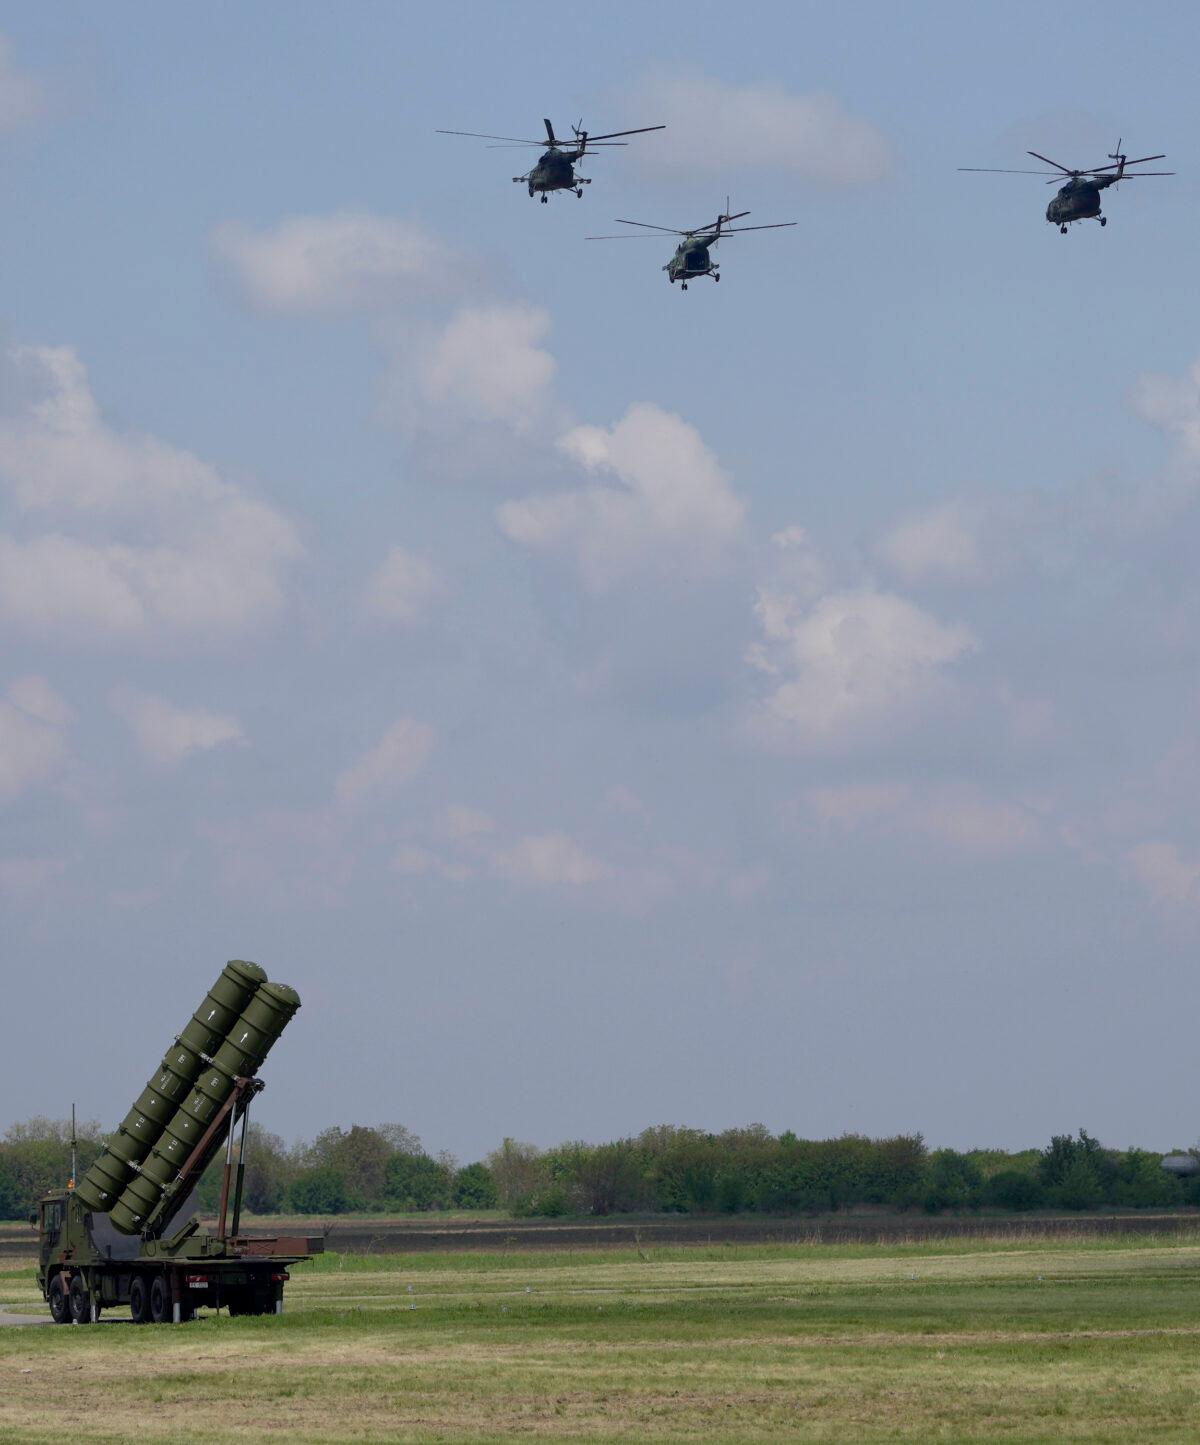 HQ-22 anti-aircraft systems, whose export version is known as FK-3, during the military exercises on a military airport near Belgrade, Serbia, on April 30, 2022. (Darko Vojinovic/AP Photo)